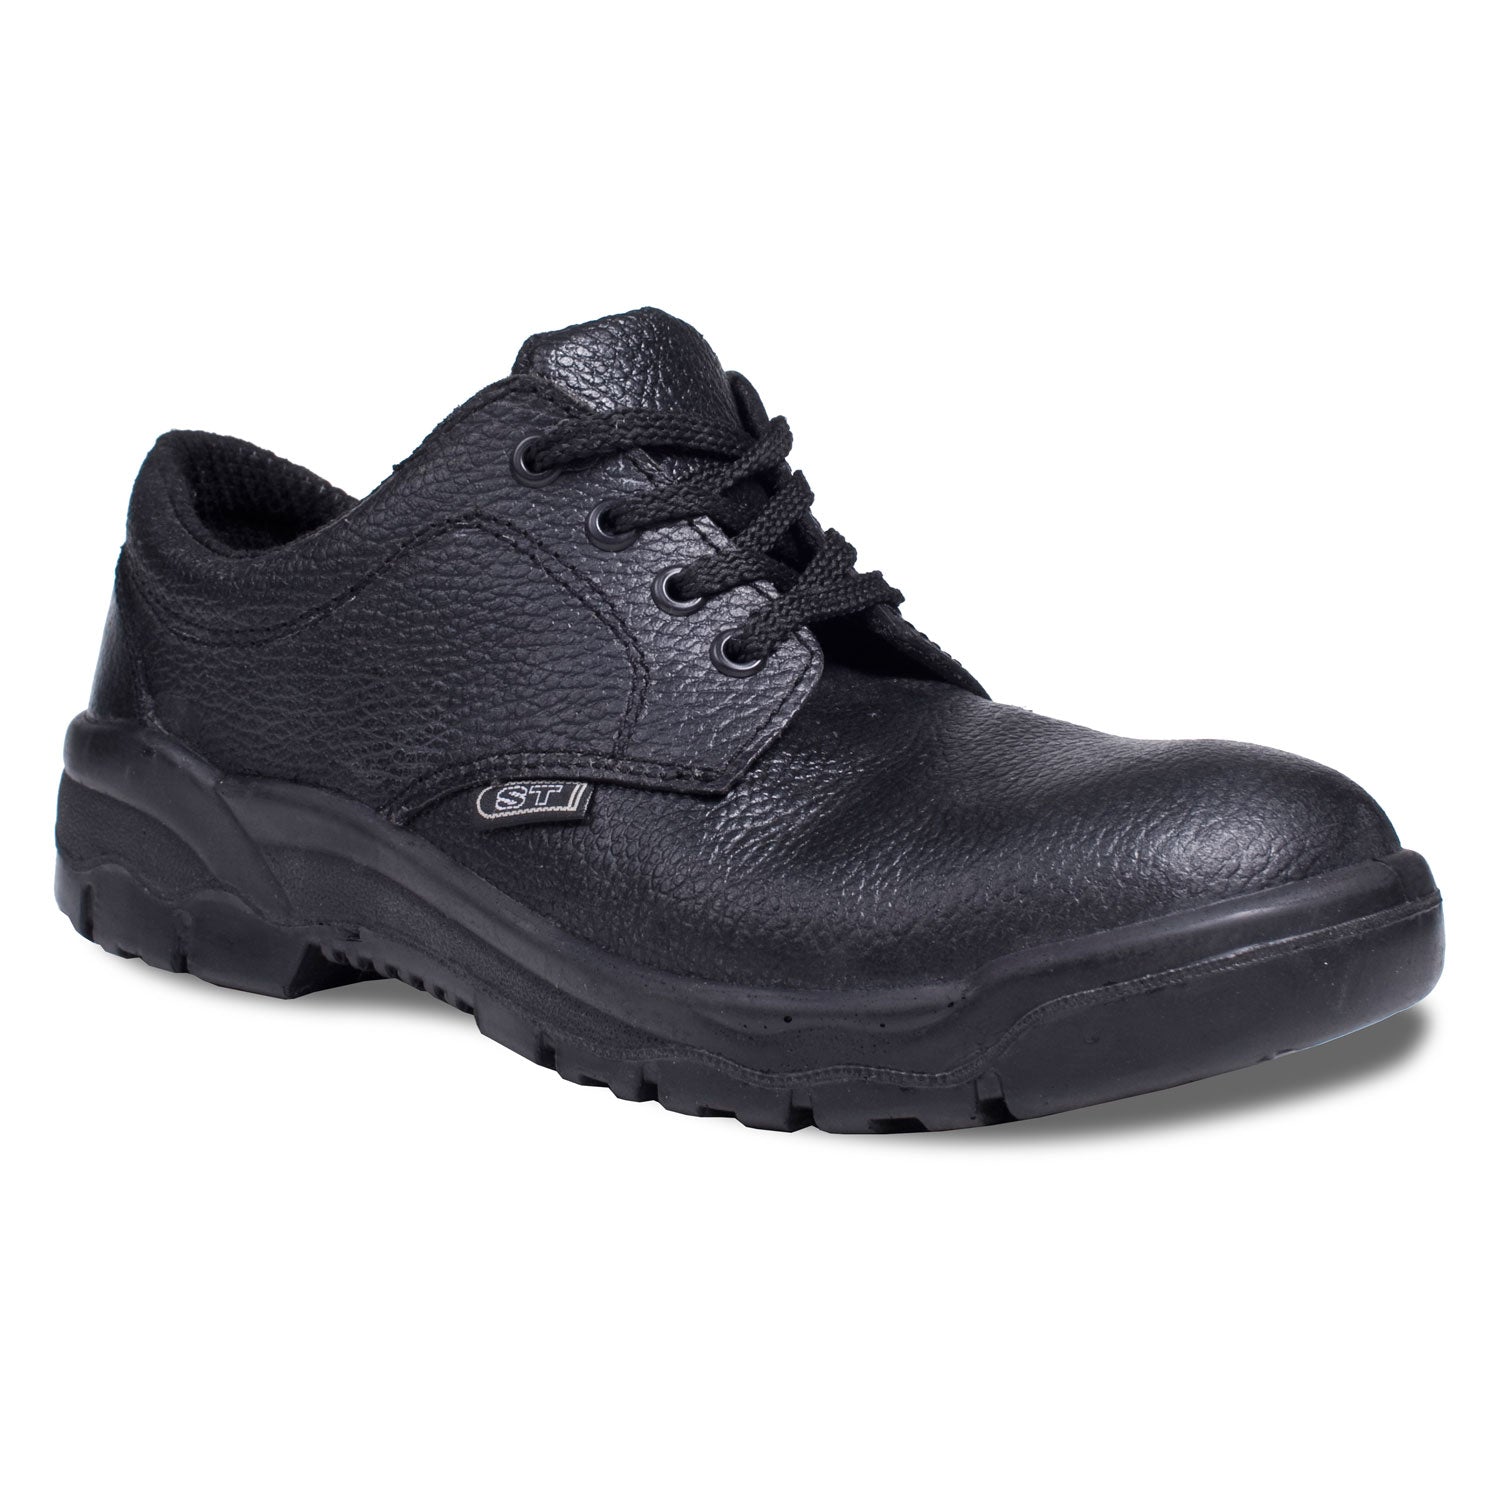 Supertouch Safety Shoe - F16